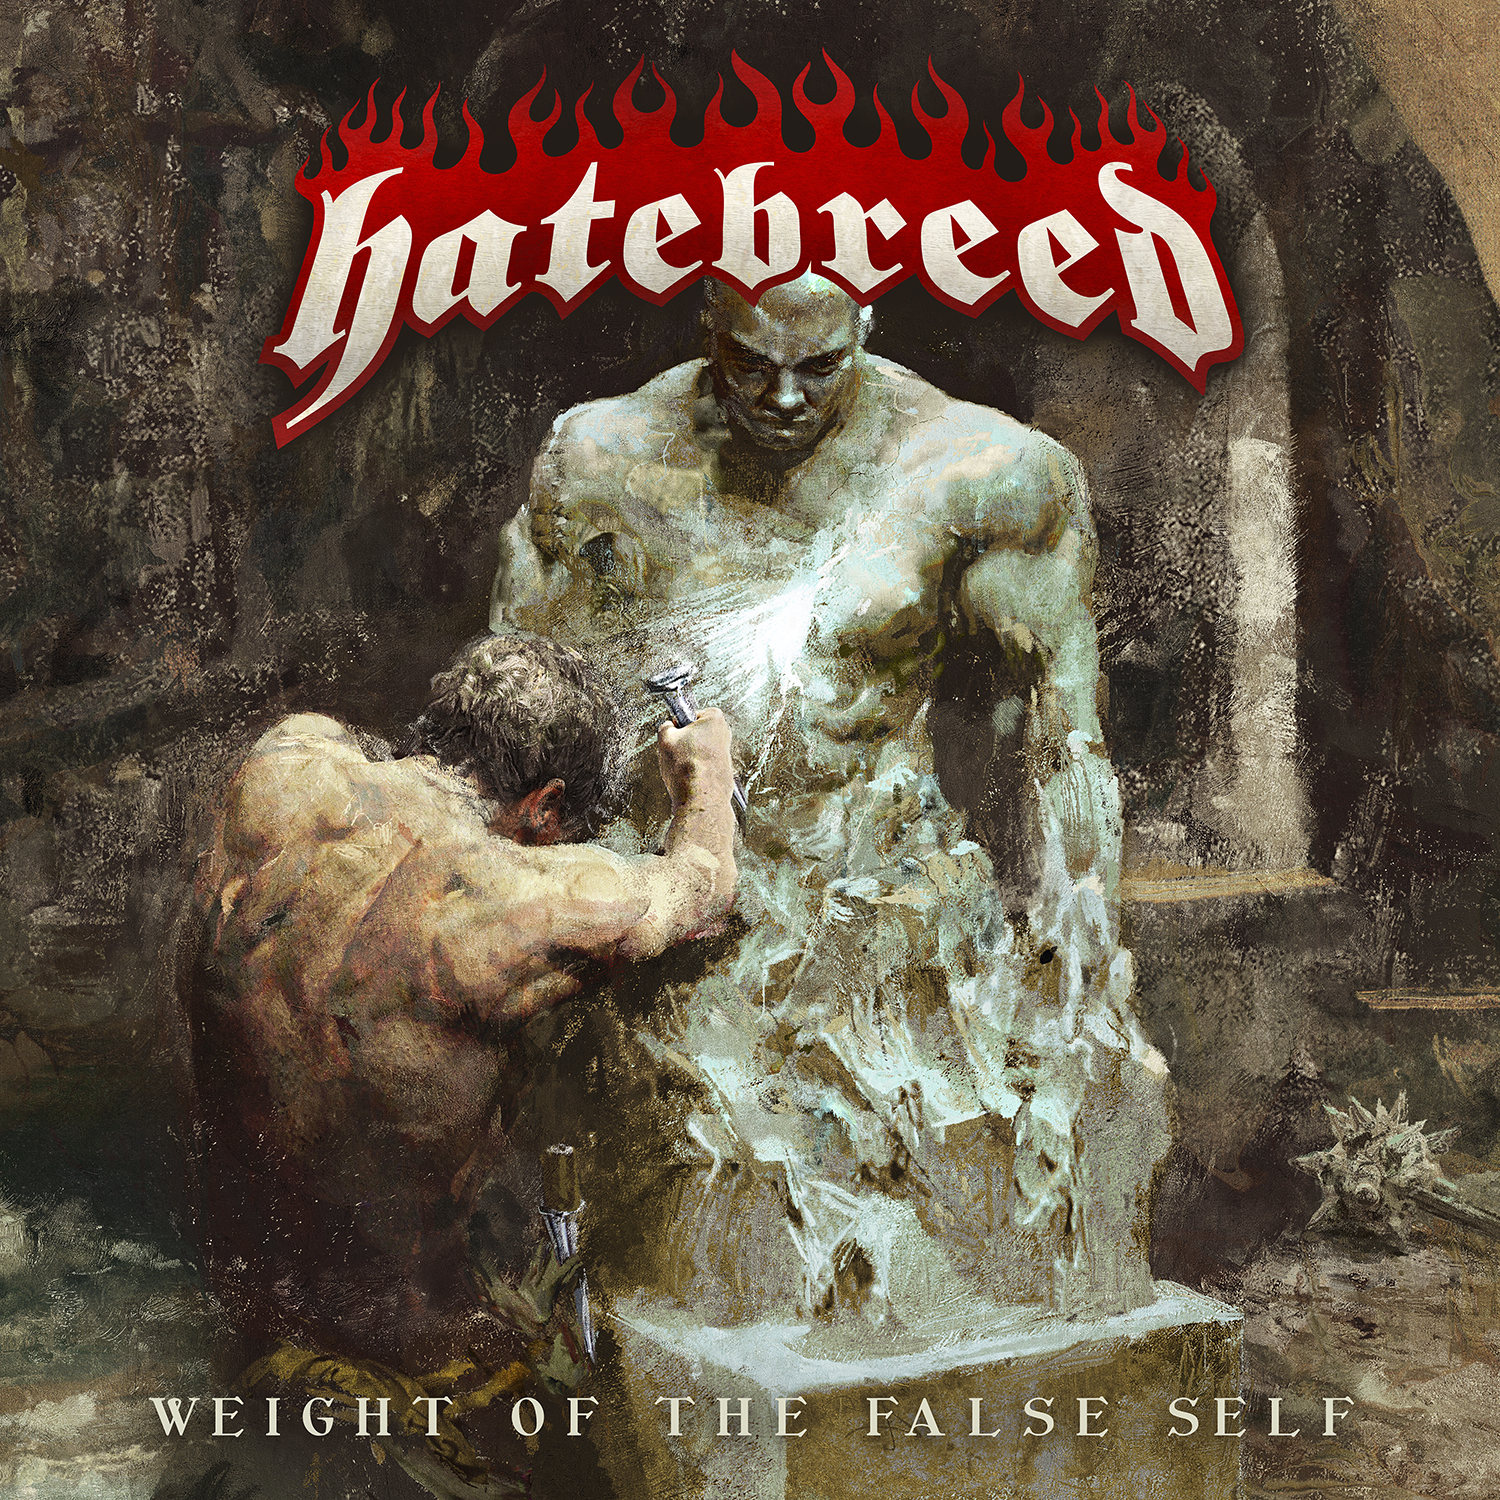 Metal-Review: HATEBREED - Weight Of The False Self